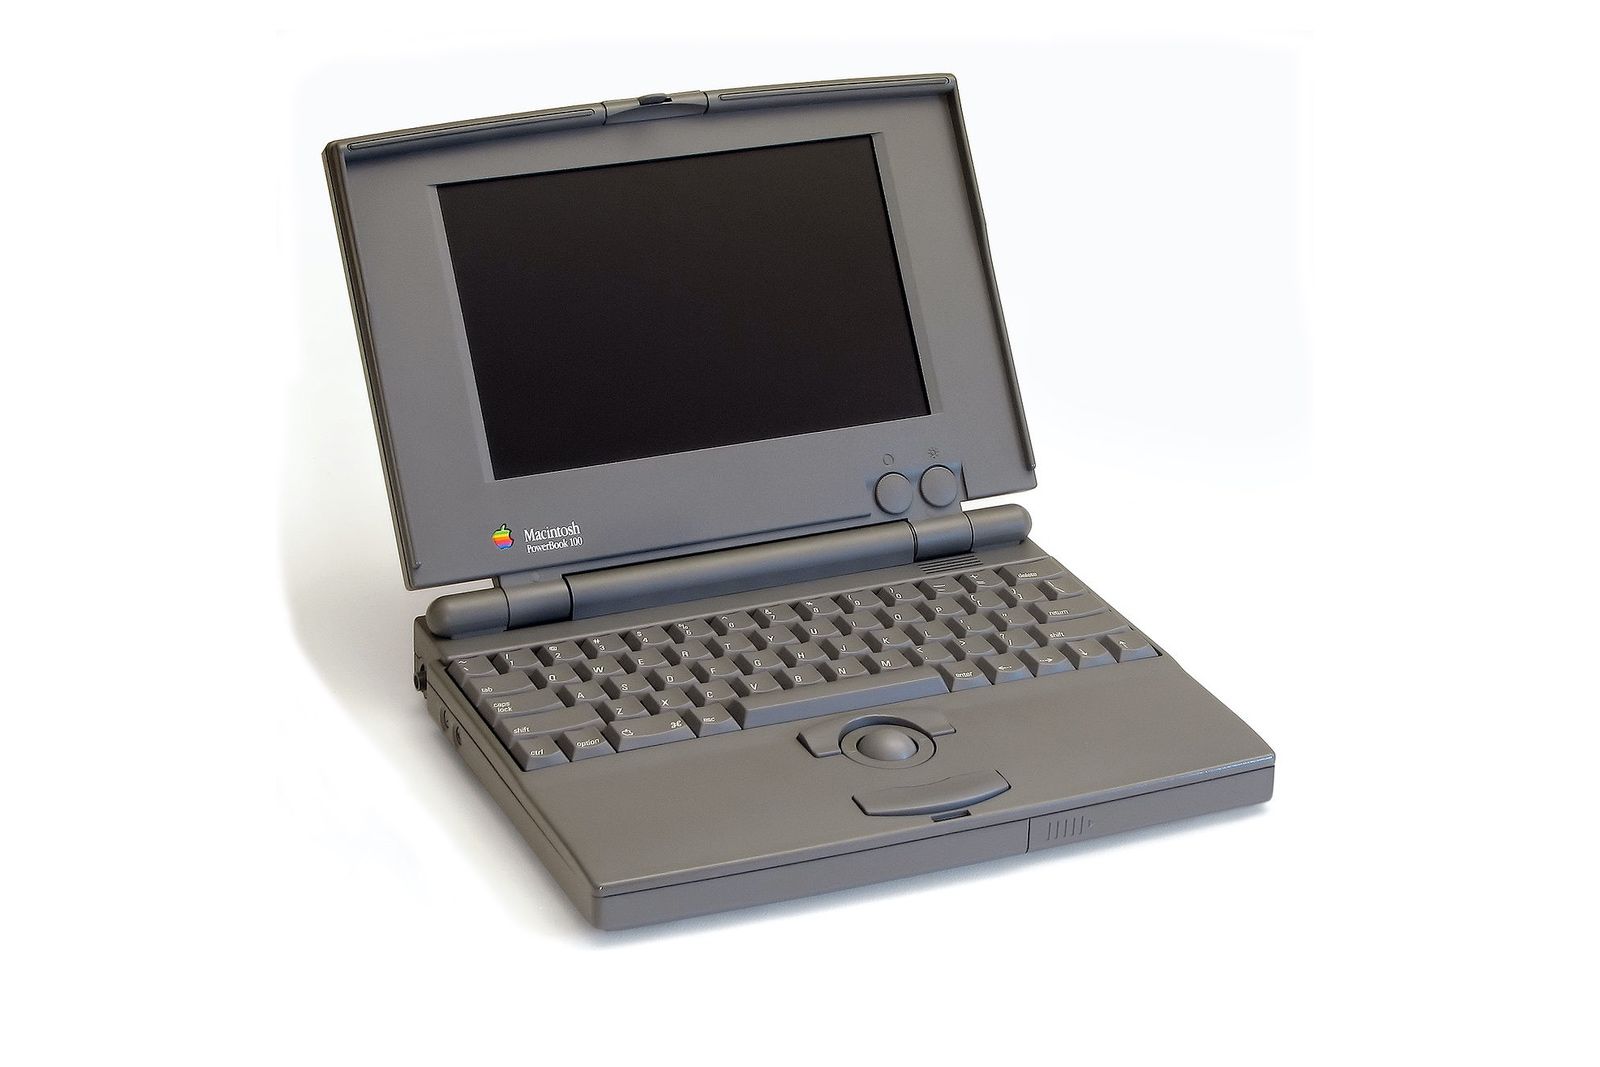 Historic Apple Mac Computers - Walk Down Memory Lane With These Classic Machines image 6